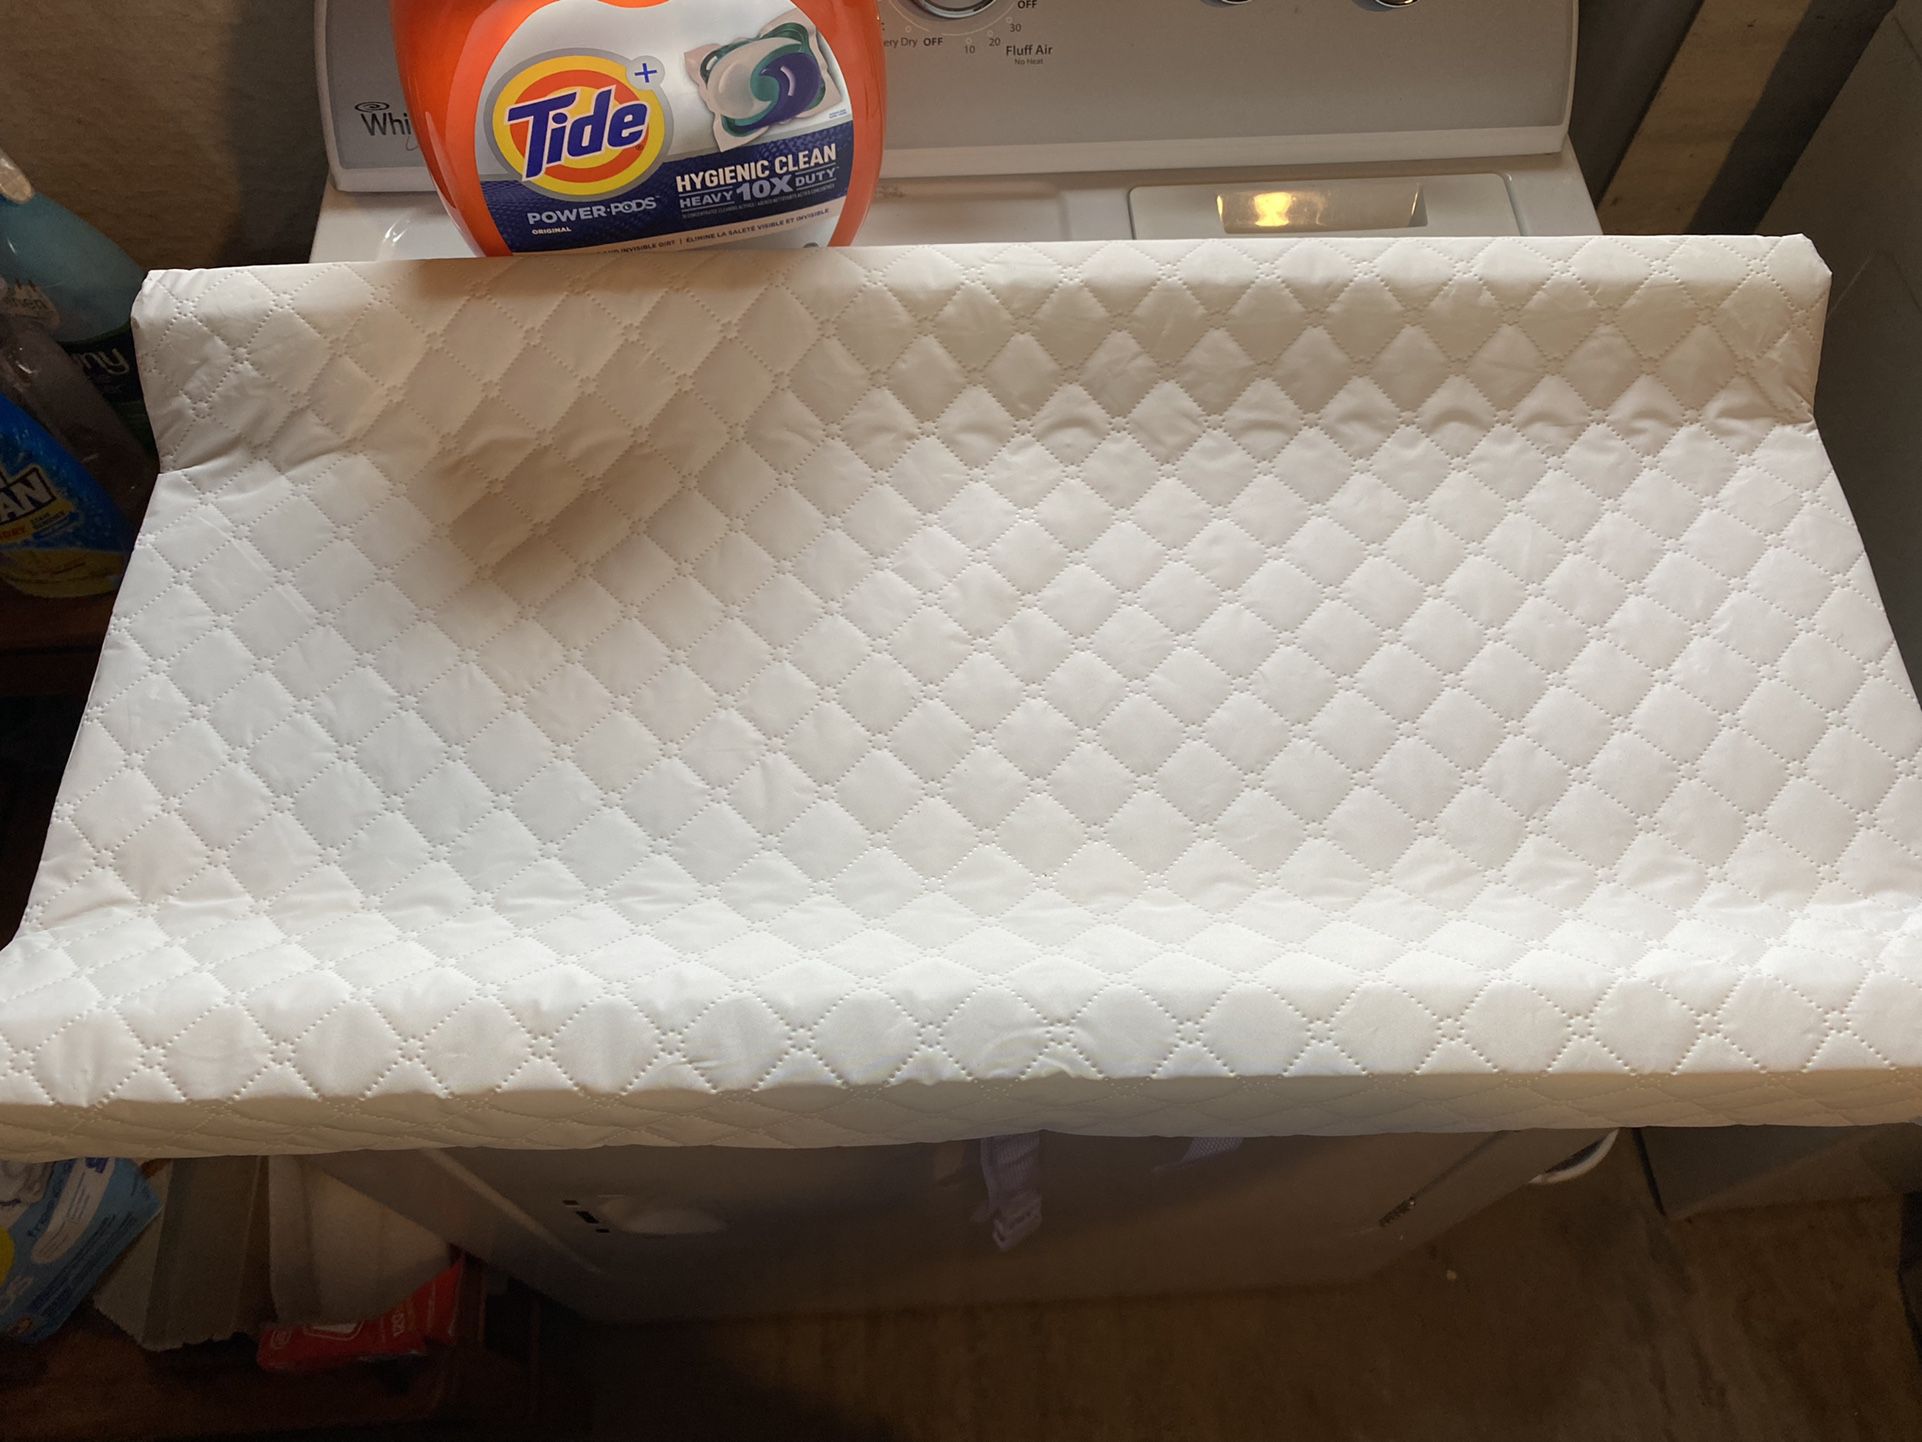 Changing Table Pad - New